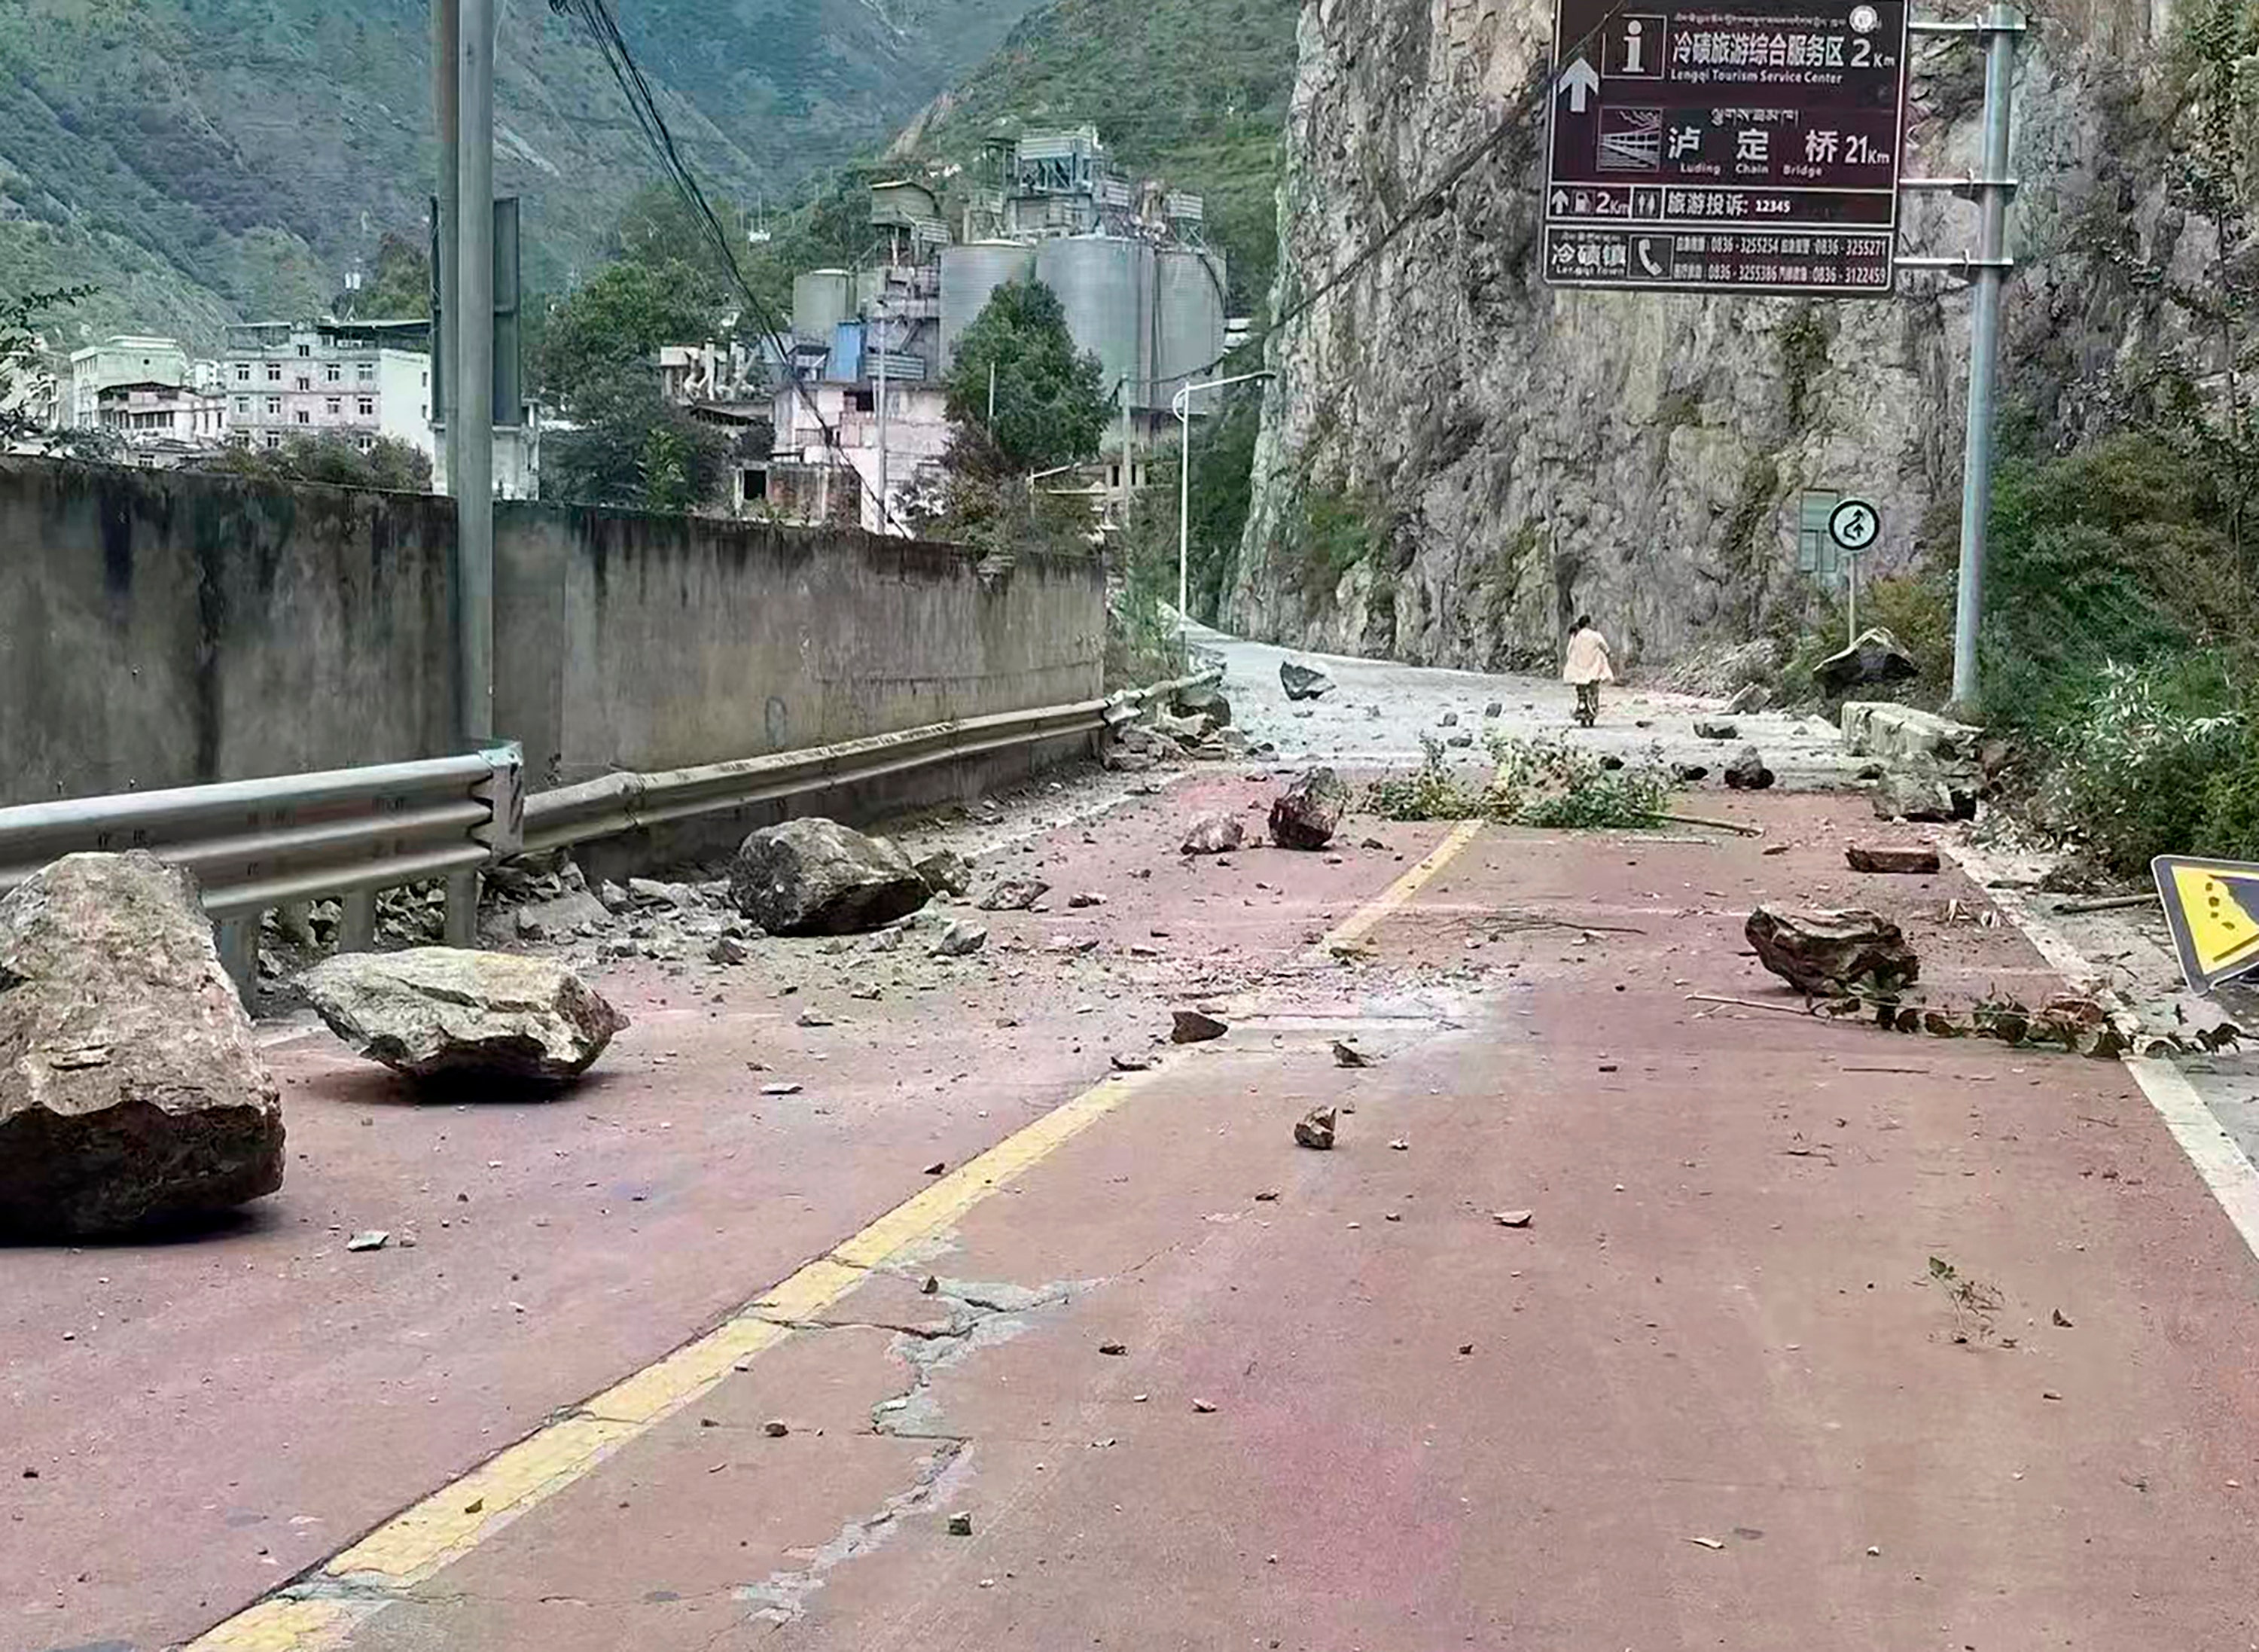 Taiwan offers to send emergency responders to China after devastating 6.8 magnitude earthquake